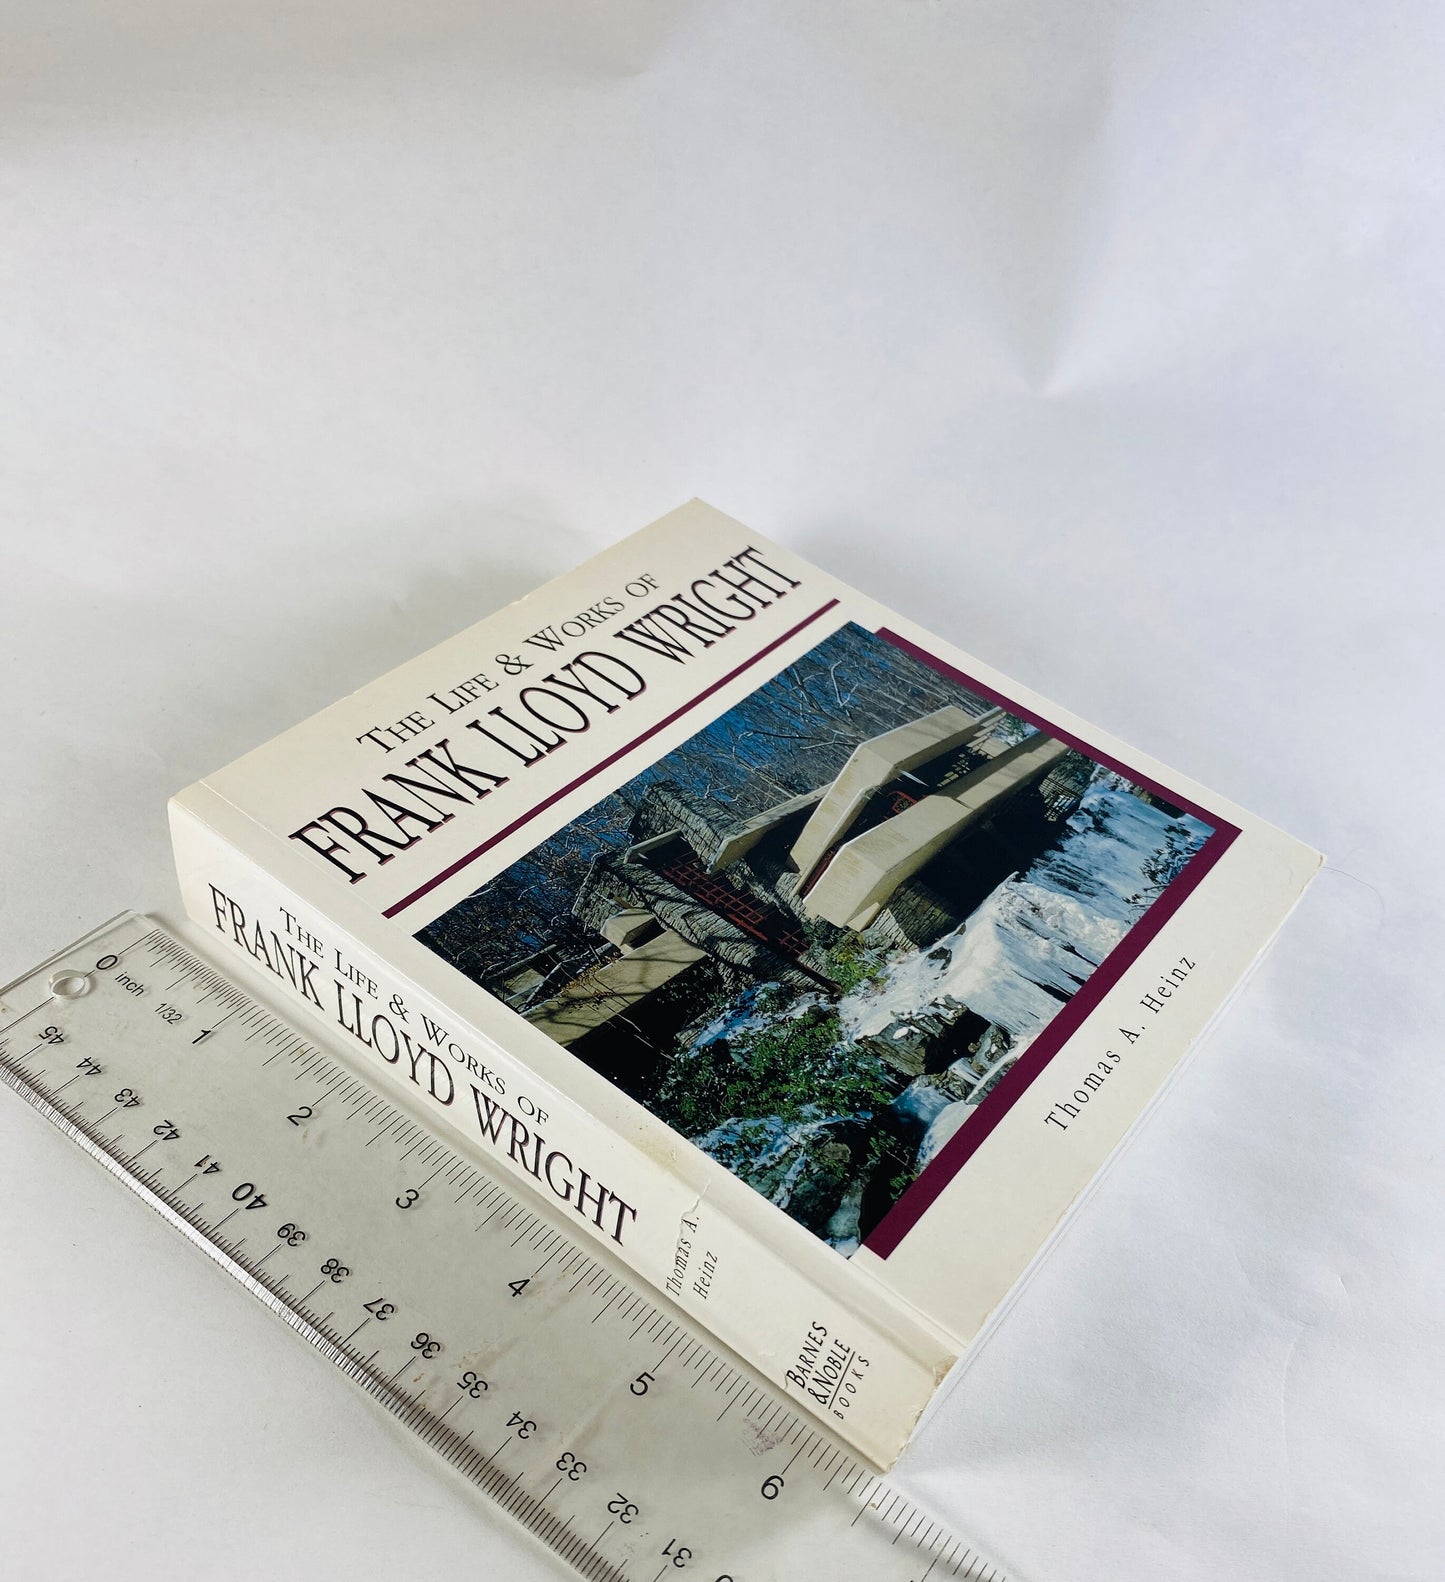 Frank Lloyd Wright vintage paperback book by Thomas Heinz with GORGEOUS photographs detailing the work of this visionary architect